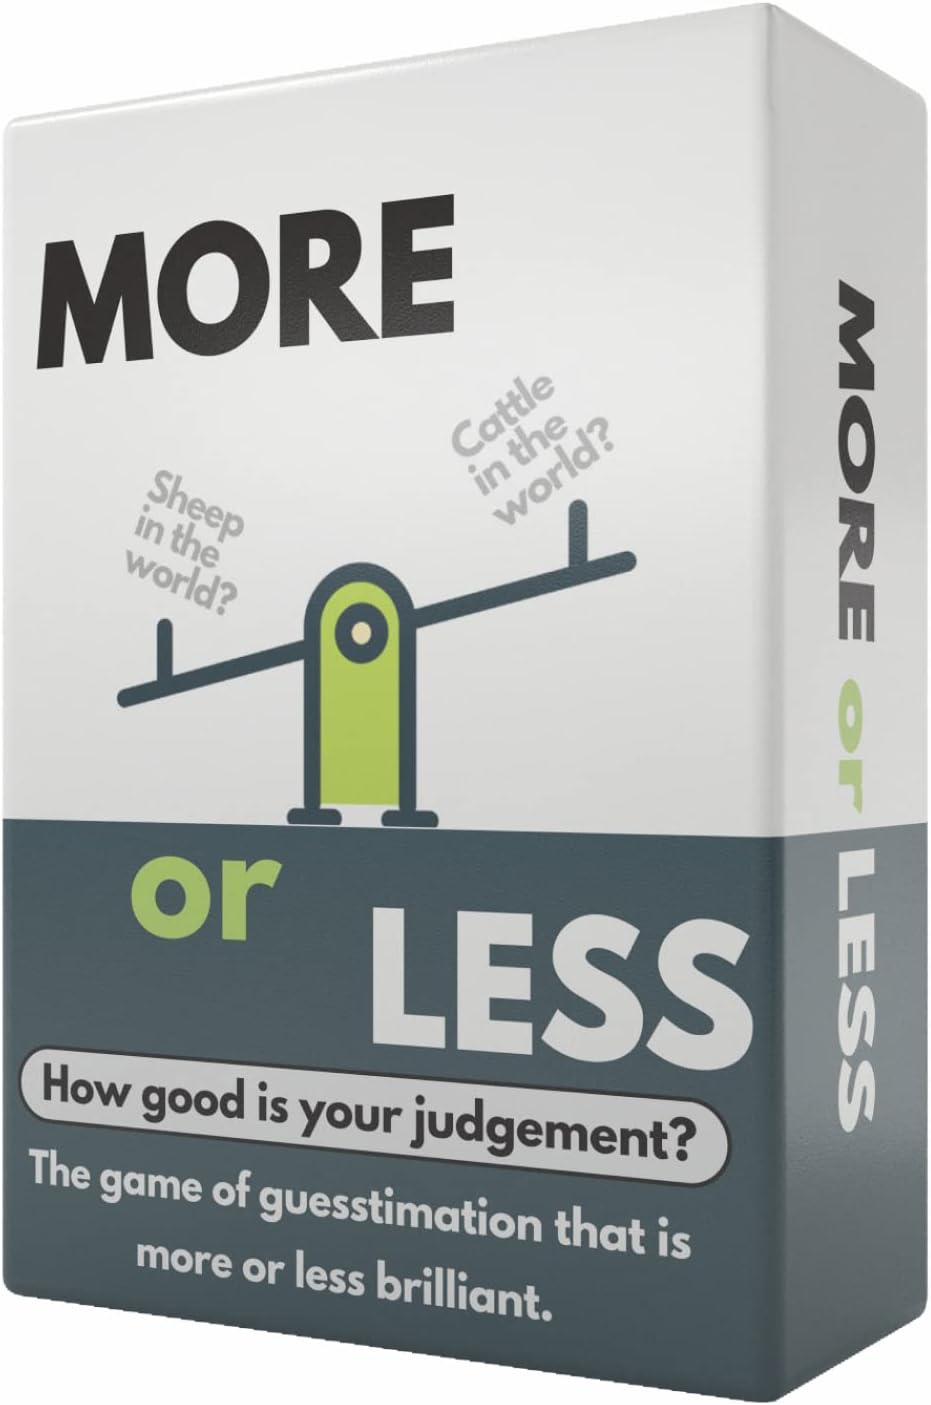 More or Less Original Edition Card Game - How Good Is Your Judgement? 2 Players + | Fun Family Party Games for Adults & Kids Birthday, Travel, Gift for Boys and Girls